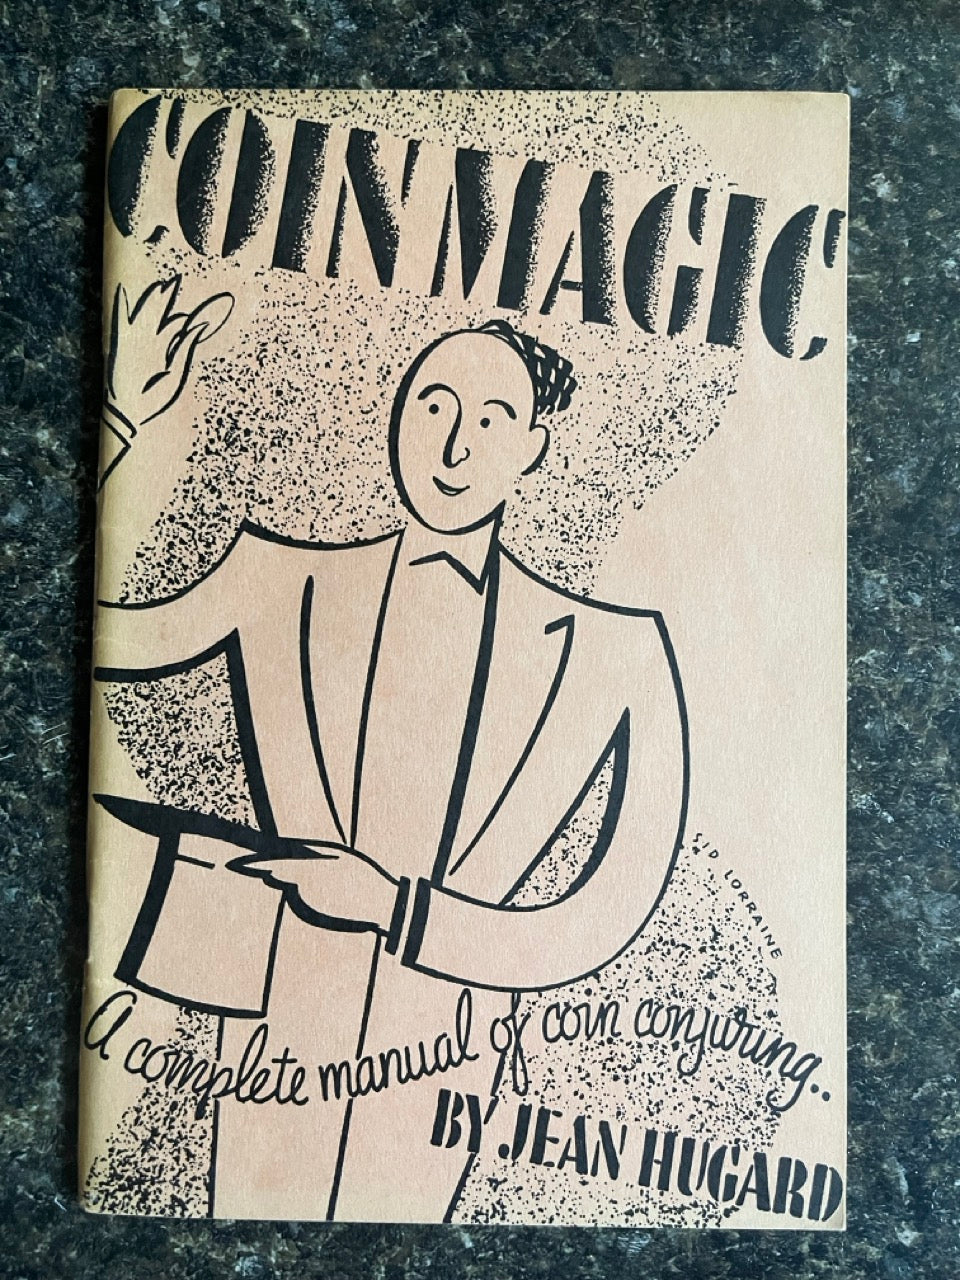 Coin Magic: A Complete Manual of Coin Conjuring - Jean Hugard